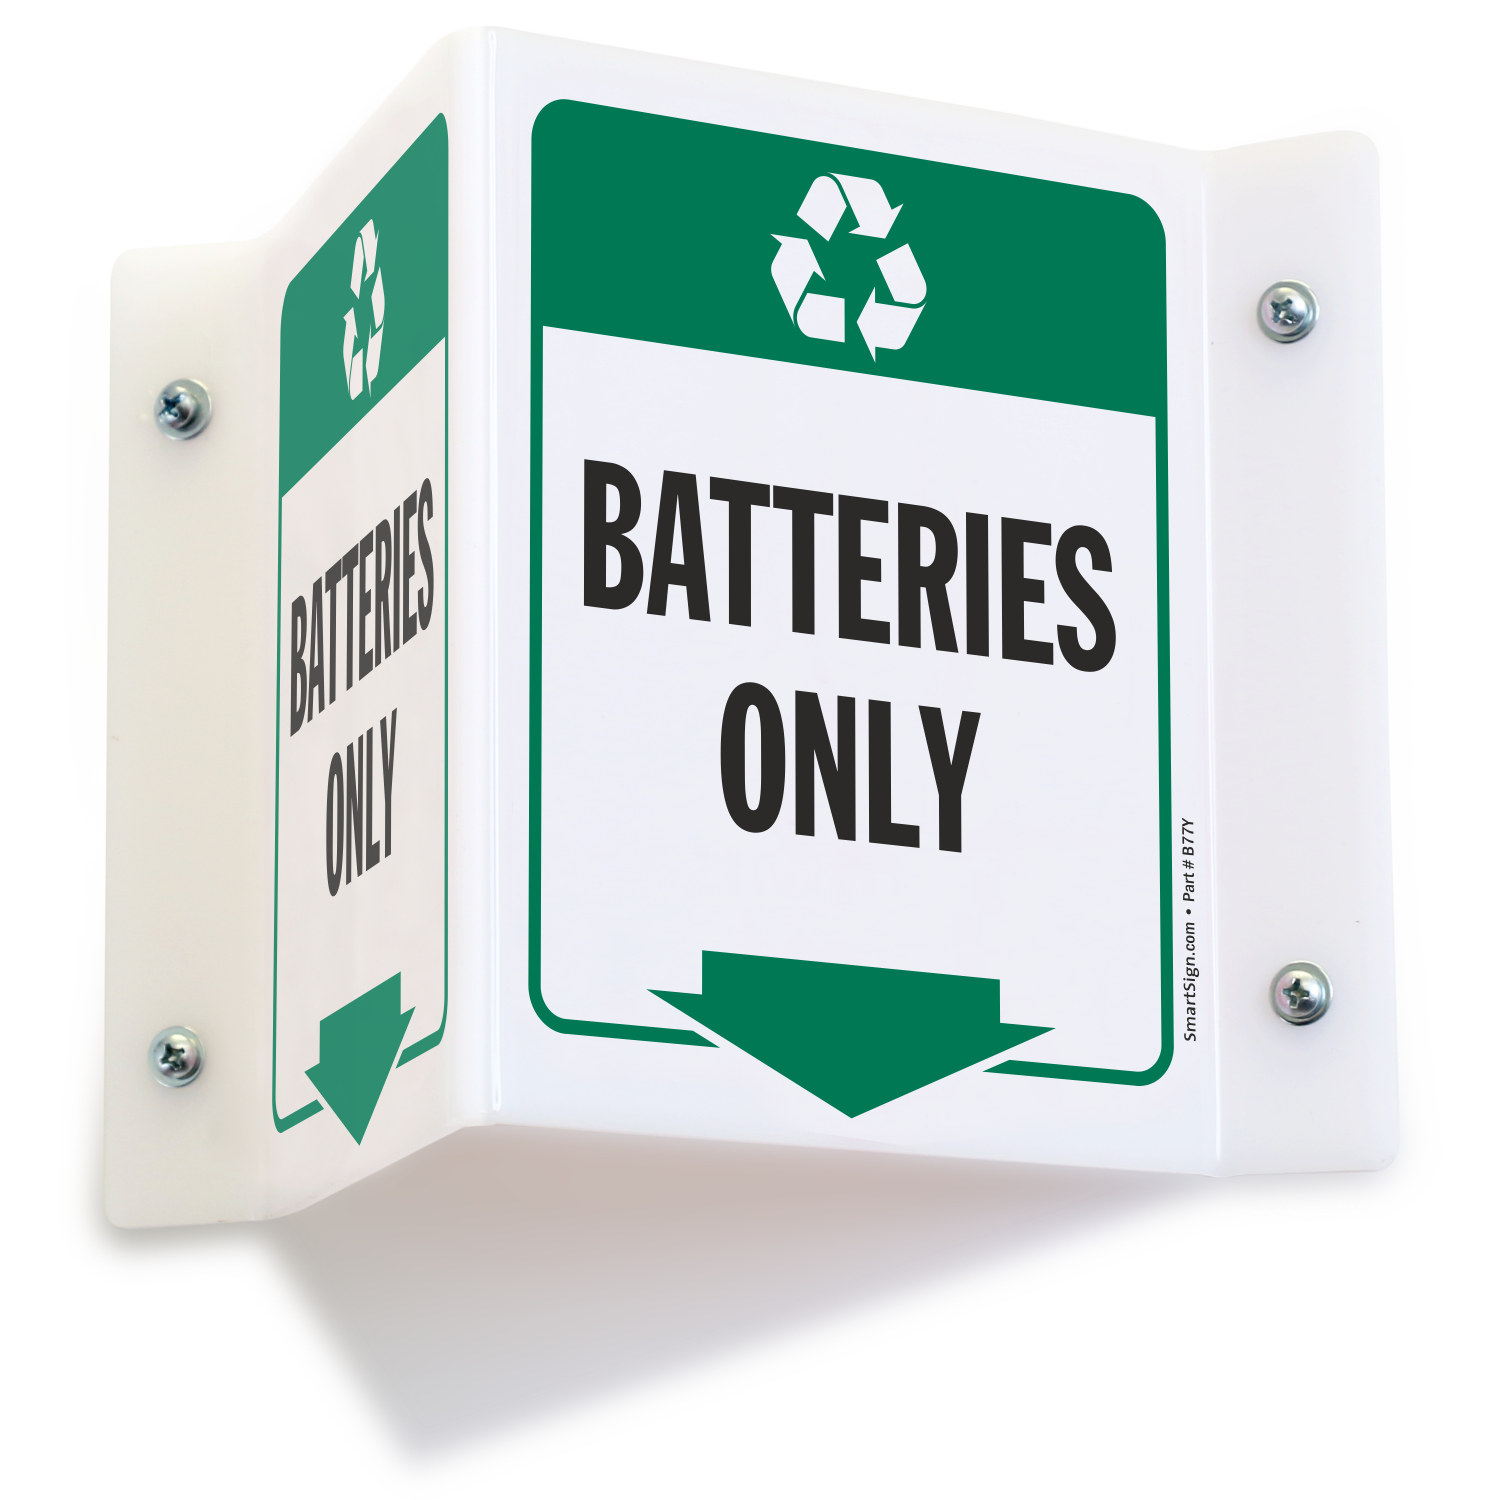 Recycling sign. Recycle sign PNG. Battery Recycling. Trash only. Recycle batteries